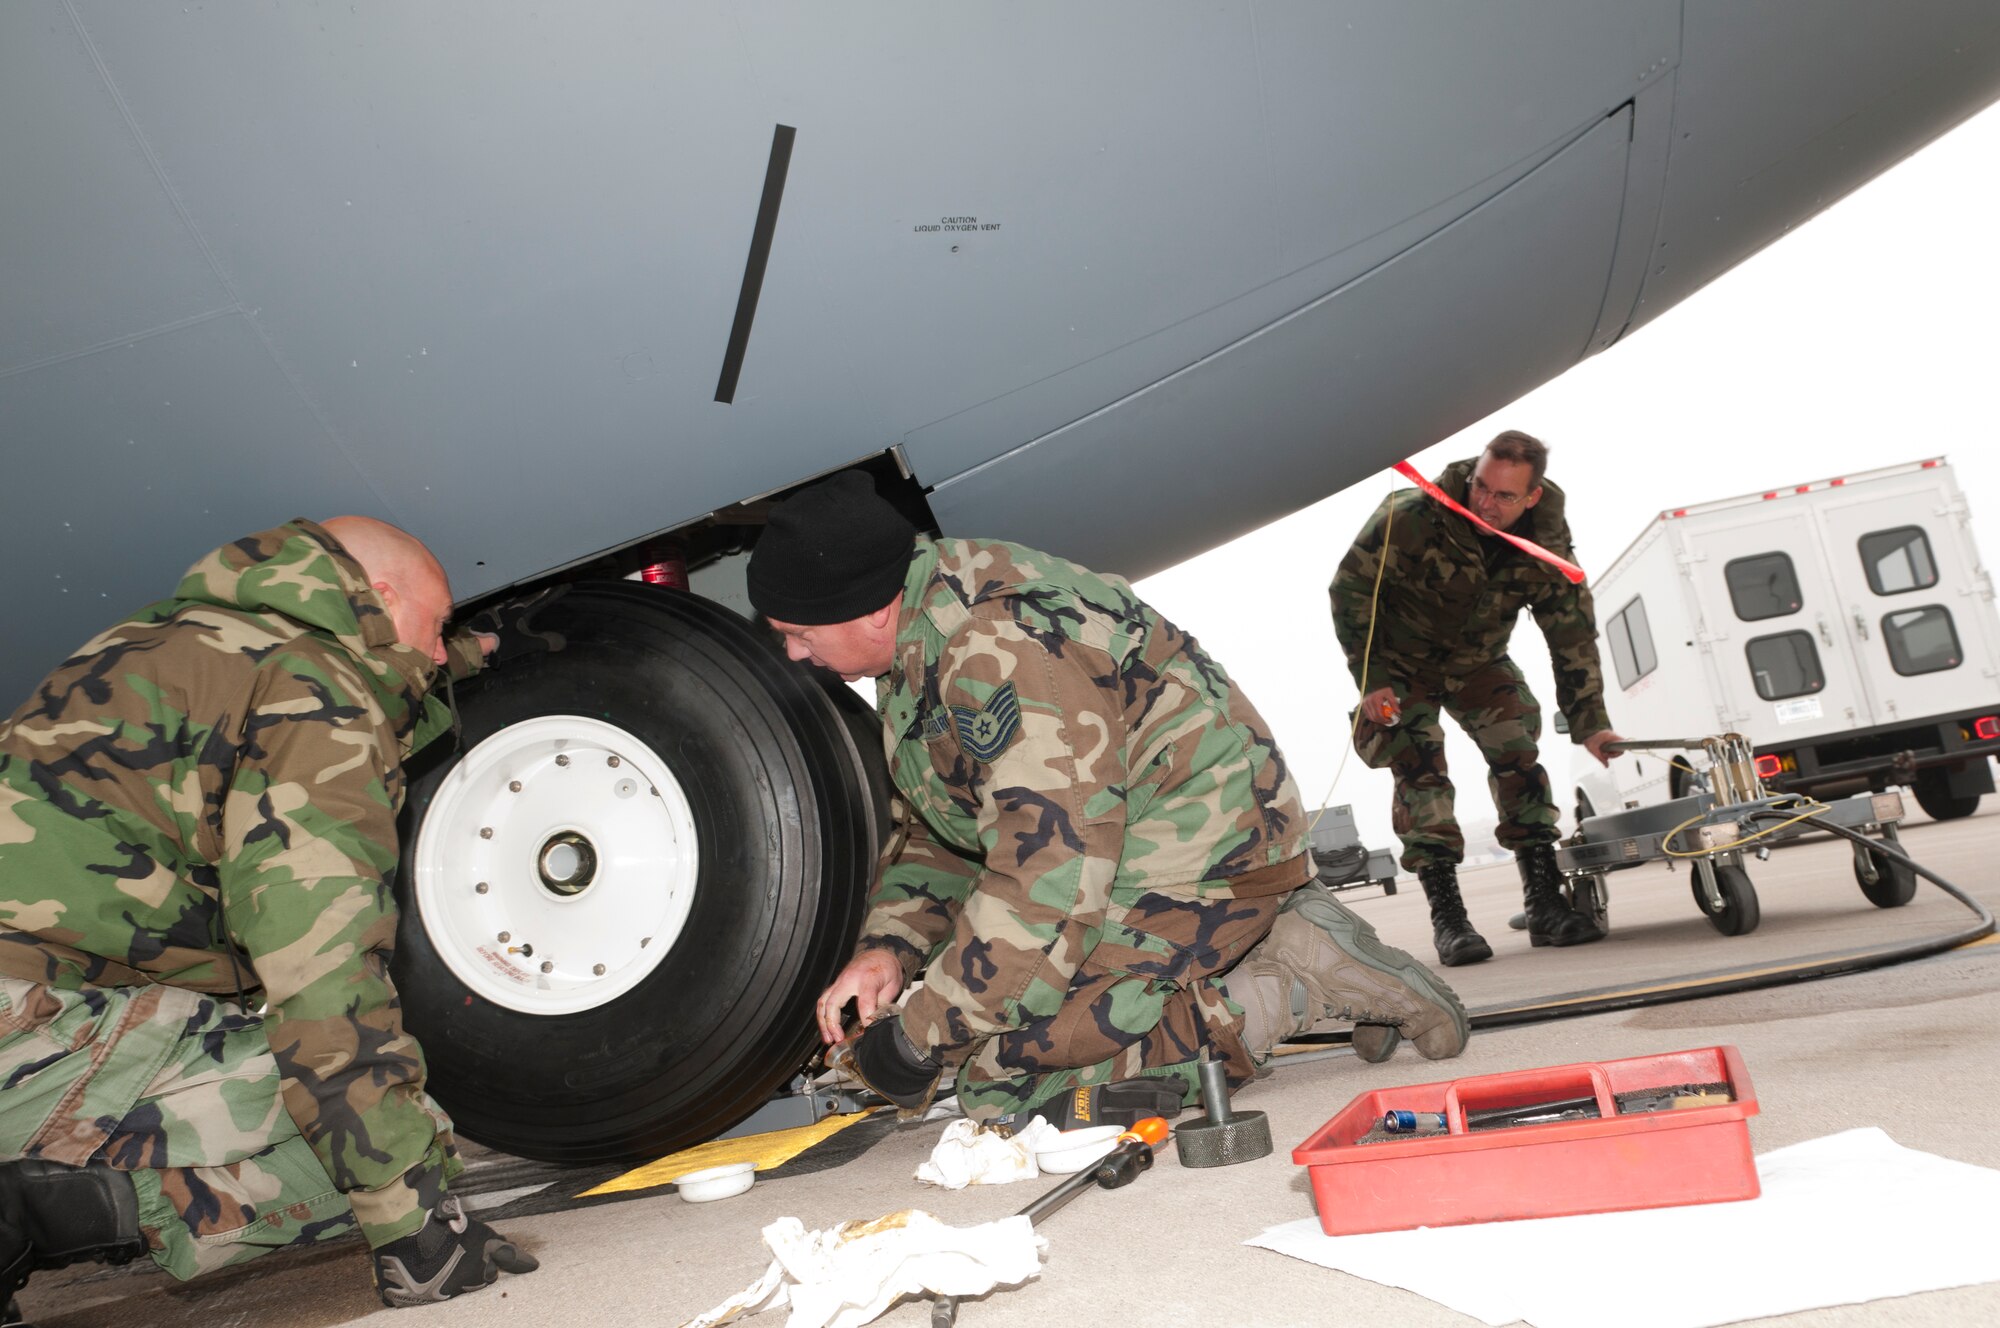 Maintenance Airmen change a tire on a Minnesota Air National Guard C-130 “Hercules” on the flightline at the Minneapolis – St. Paul international airport, on Oct. 31, 2011 wearing the Battle Dress Uniform on the last official day the Air Force allows BDUs to be worn. From left to right, Technical Sgt. Brad Dahl of the 133rd Maintenance Squadron, Technical Sgt. Dan Whitehead of the 133rd Aircraft Maintenance Squadron and Master Sgt. Tom Heckman, also from 133rd AMXS get the job done. USAF official photo by Senior Master Sgt. Mark Moss